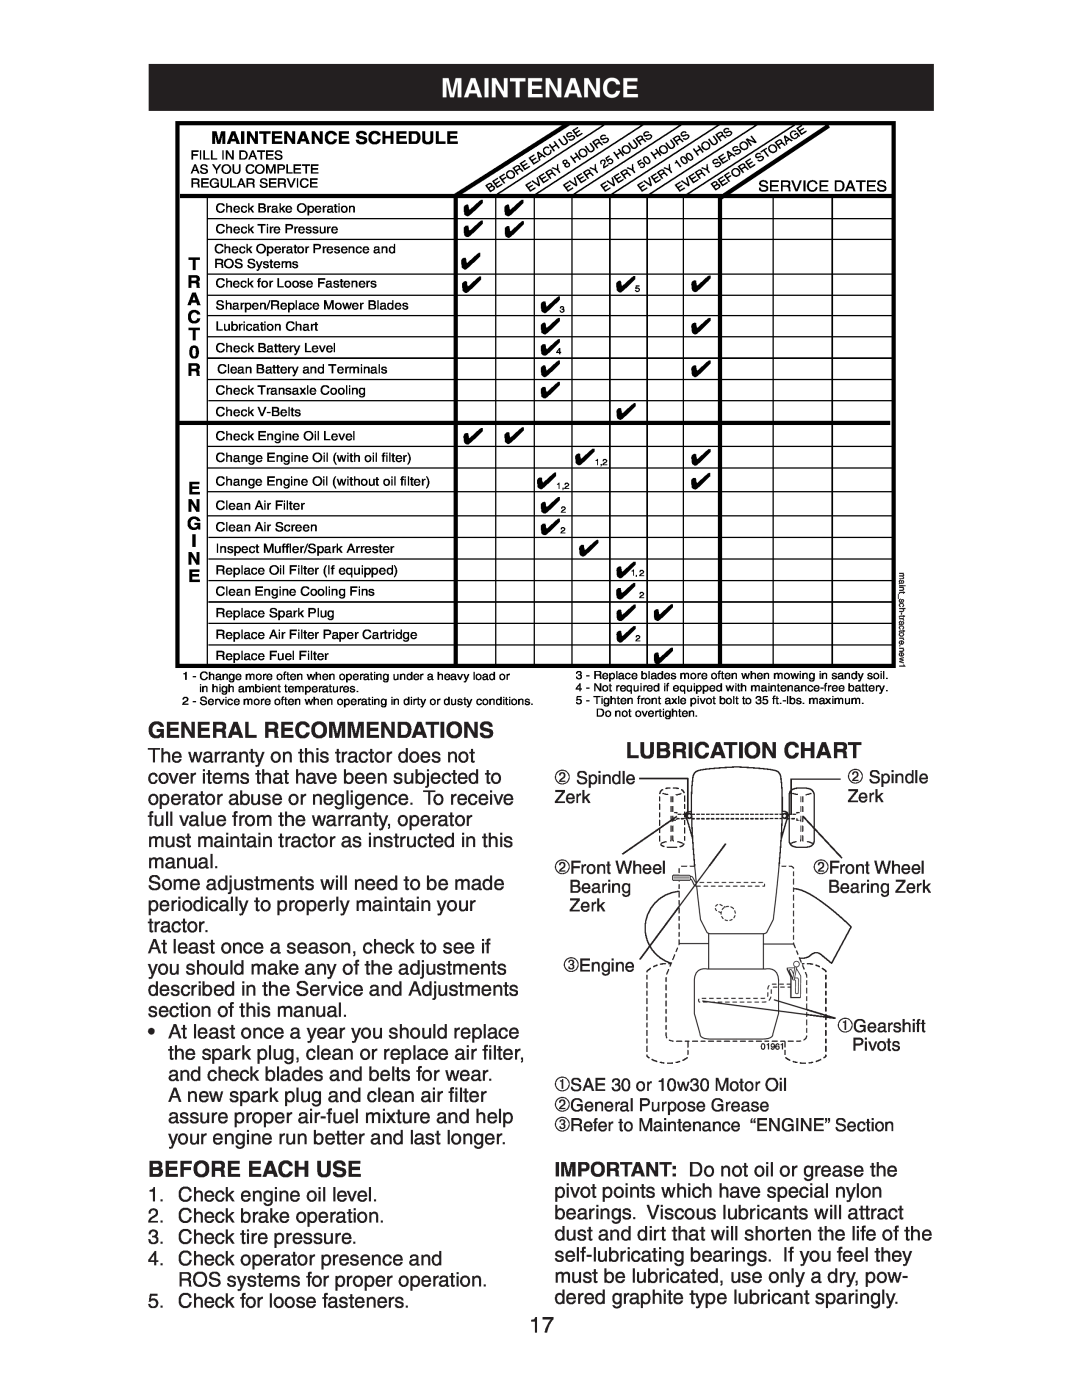 Craftsman 917.27581 owner manual Maintenance, General Recommendations, Before Each Use, Lubrication Chart 